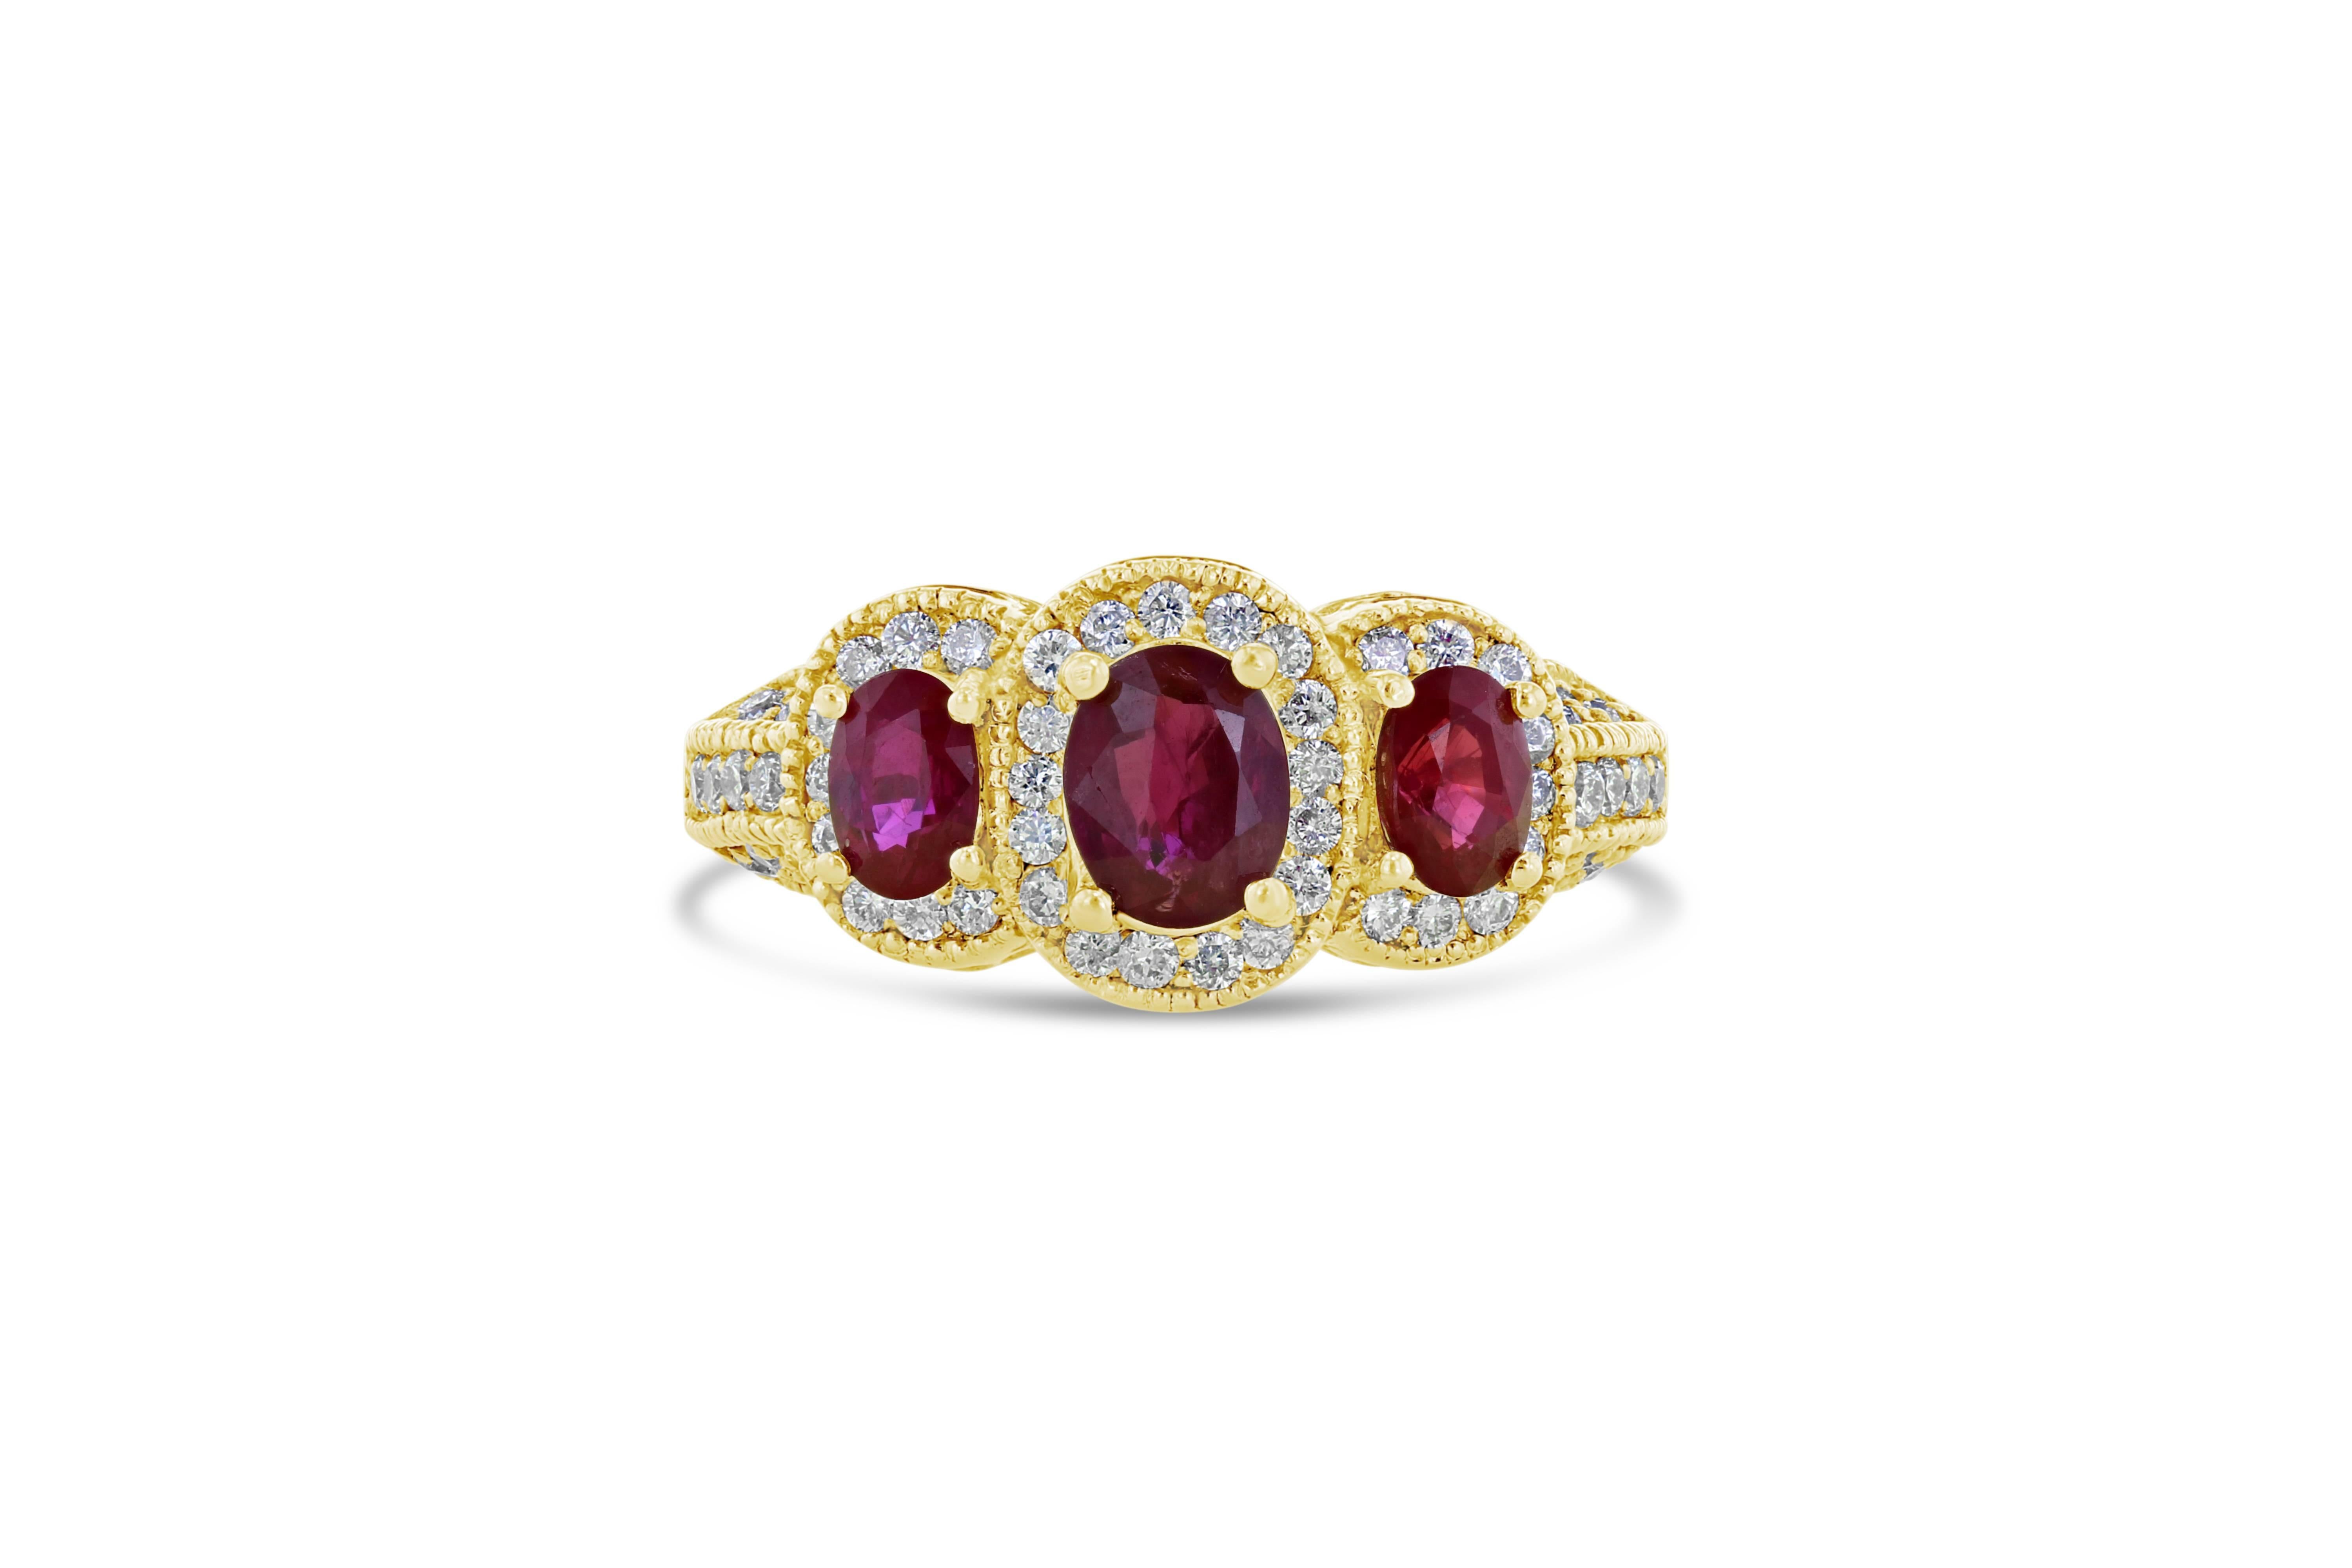 This Ruby Diamond 3 Stone Ring has an antique look but with a modern halo setting surrounding the 3 beautiful gems. The natural Burmese Rubies weigh a total of 1.70 Carats with 61 Round Cut Diamonds weighing 0.59 Carats. The ring is set in 18K